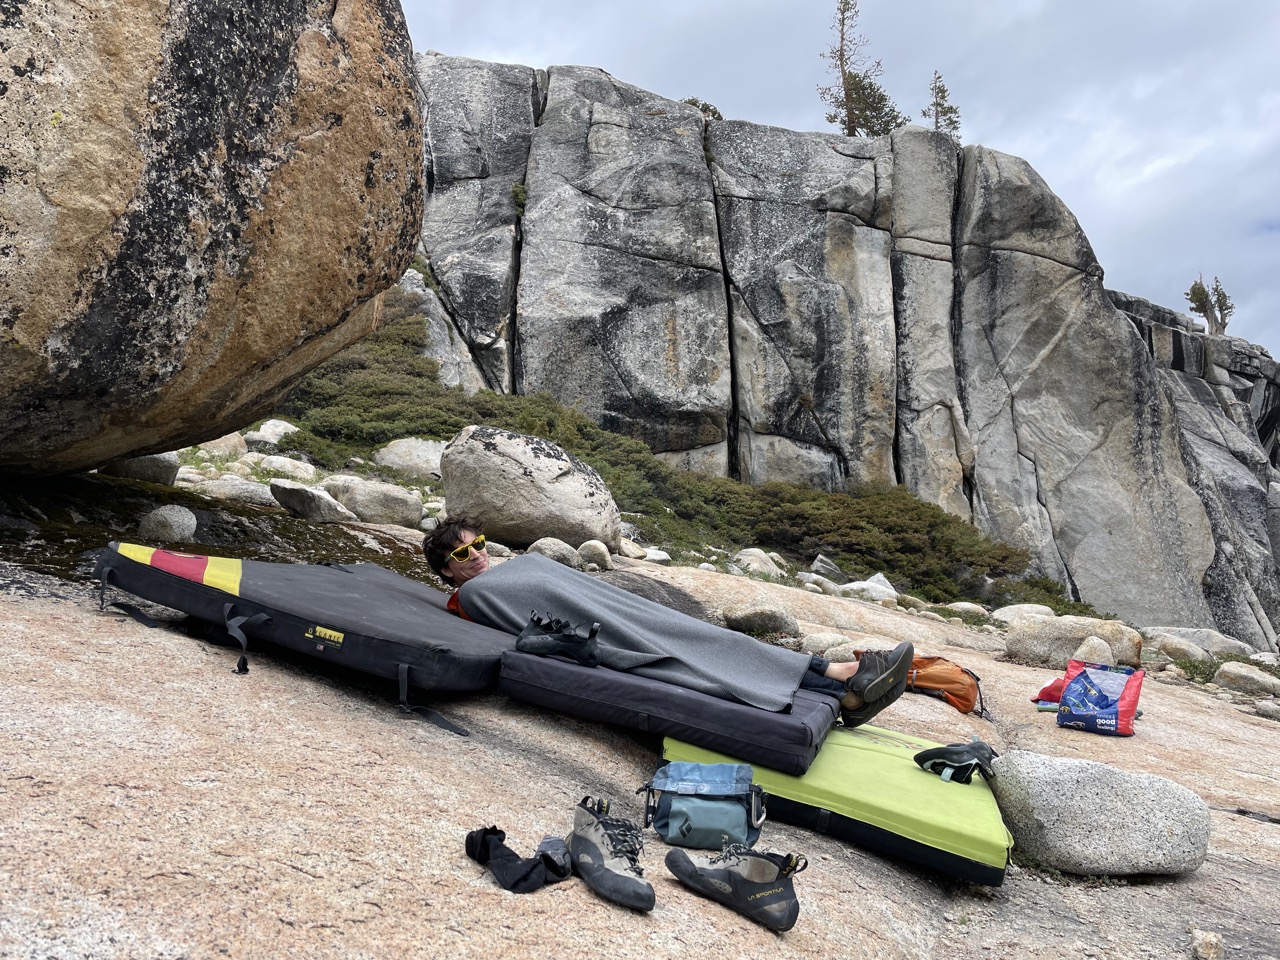 Someone forgot to pack jackets and had to use the car dog blanket! Early season problems at Olmsted Point Boulders (isn't that the trad cragging in the background?)